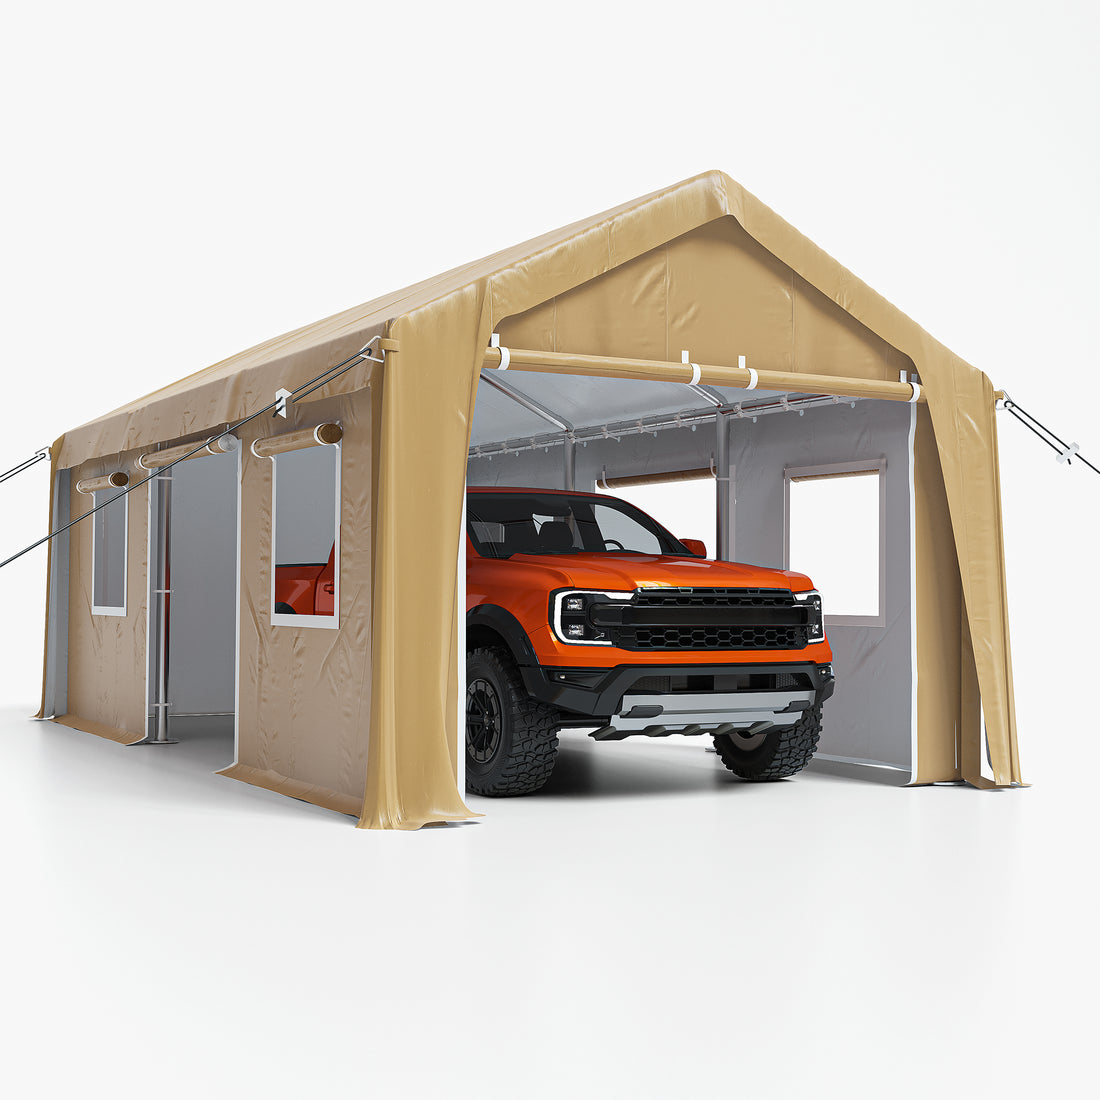 13'x20' Heavy Duty Carport, Car Canopy with Removable Sidewalls & Doors, ExtraLarge Portable Car Tent Garage with Roll-up Windows and All-Season Tarp, for Car, Truck, SUV Yellow